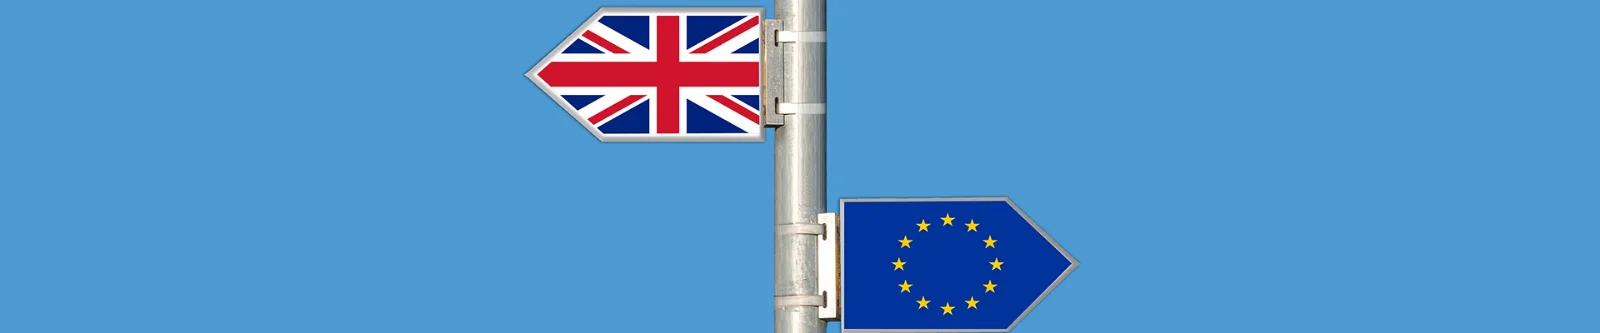 Best Execution and Beyond - What’s Happening to RTS 27 & 28 Post-Brexit?